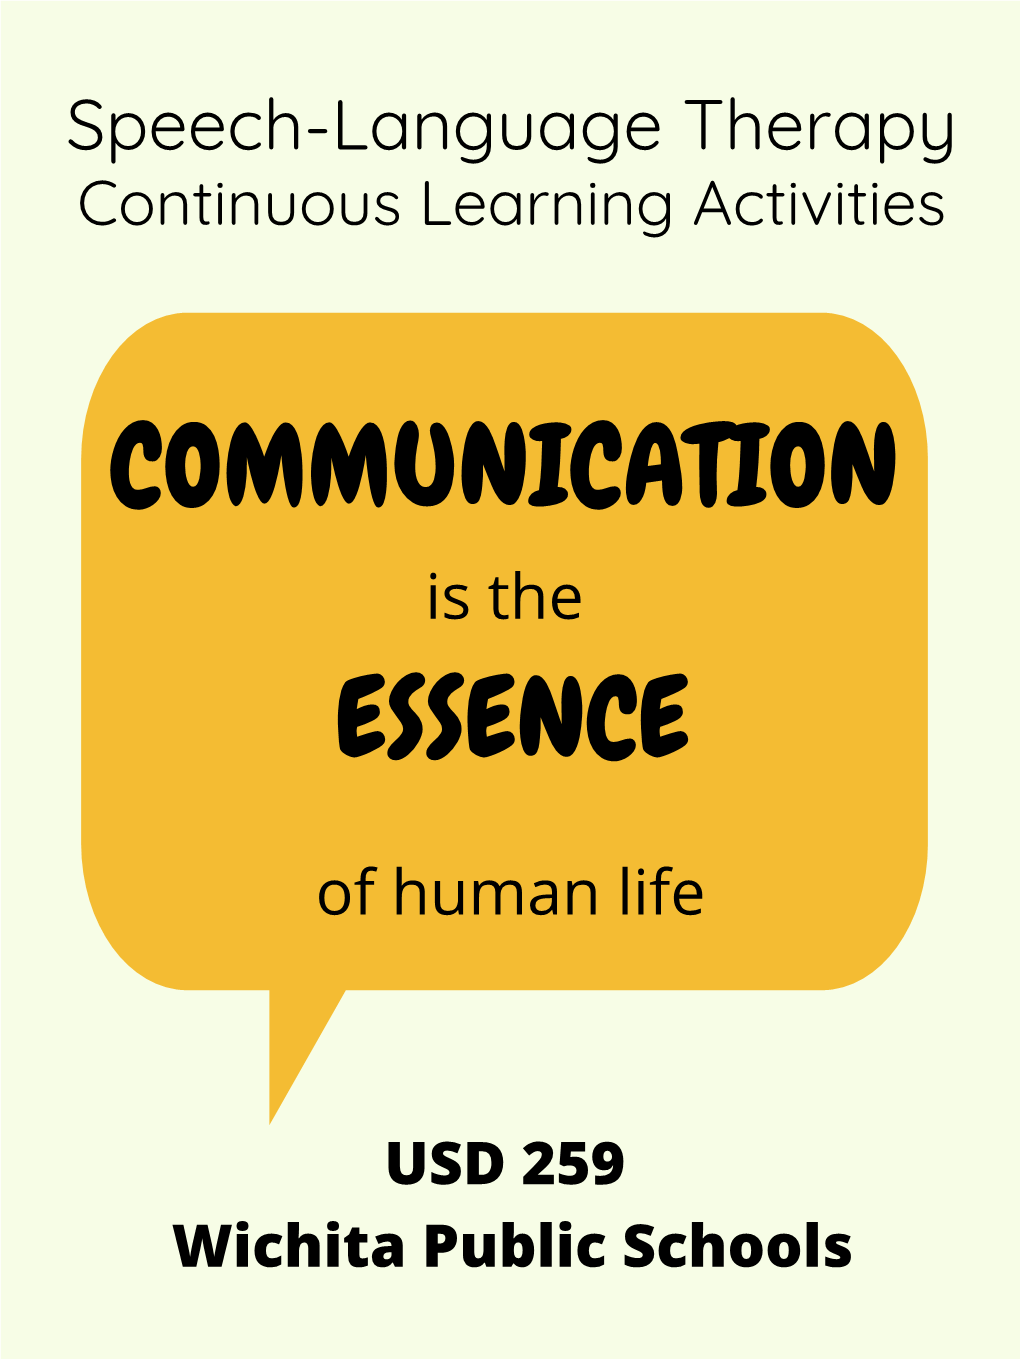 Speech-Language Therapy Continuous Learning Activities